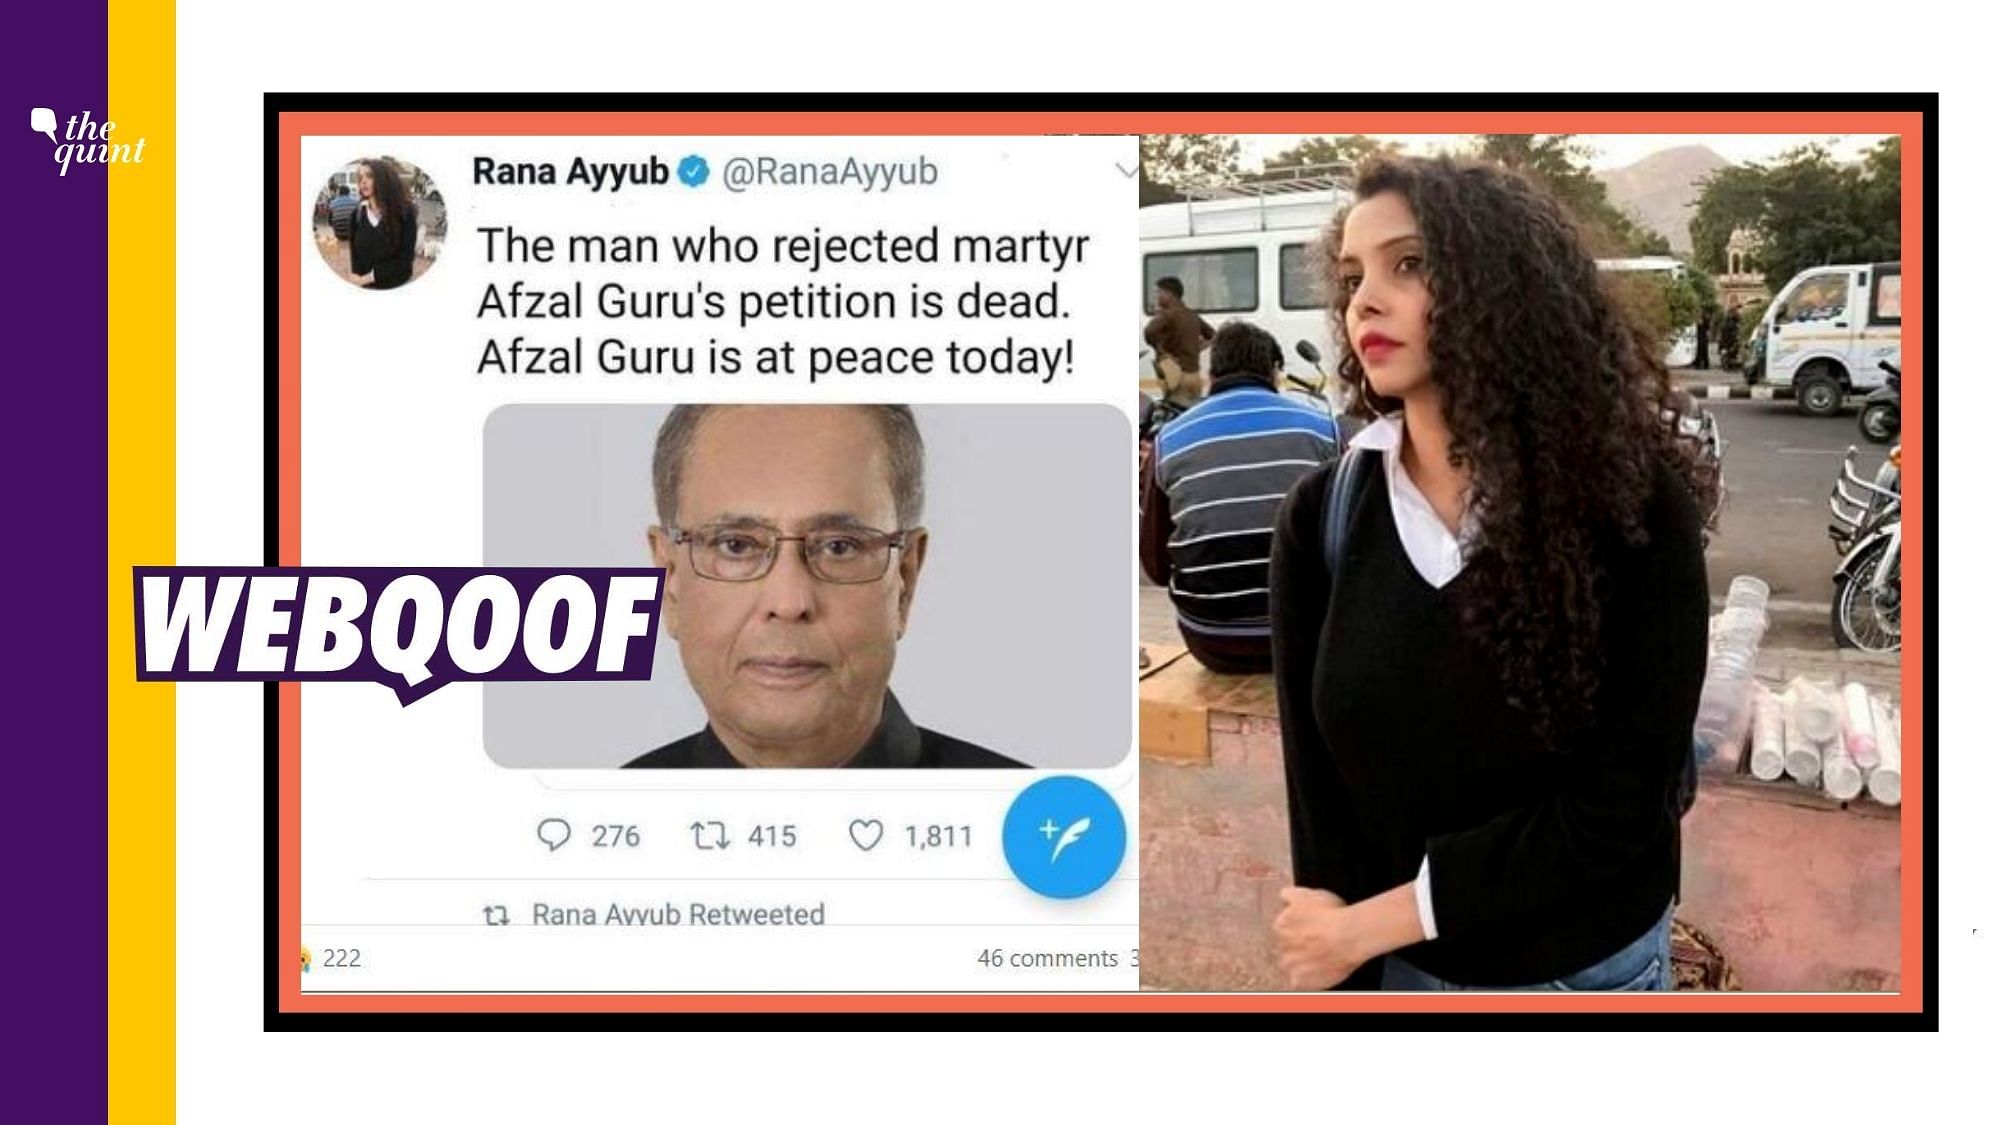 According to a viral screenshot, Ayyub, after the demise of Pranab Mukherjee tweeted that after Mukherjee’s death, Afzal Guru will now finally rest in peace.